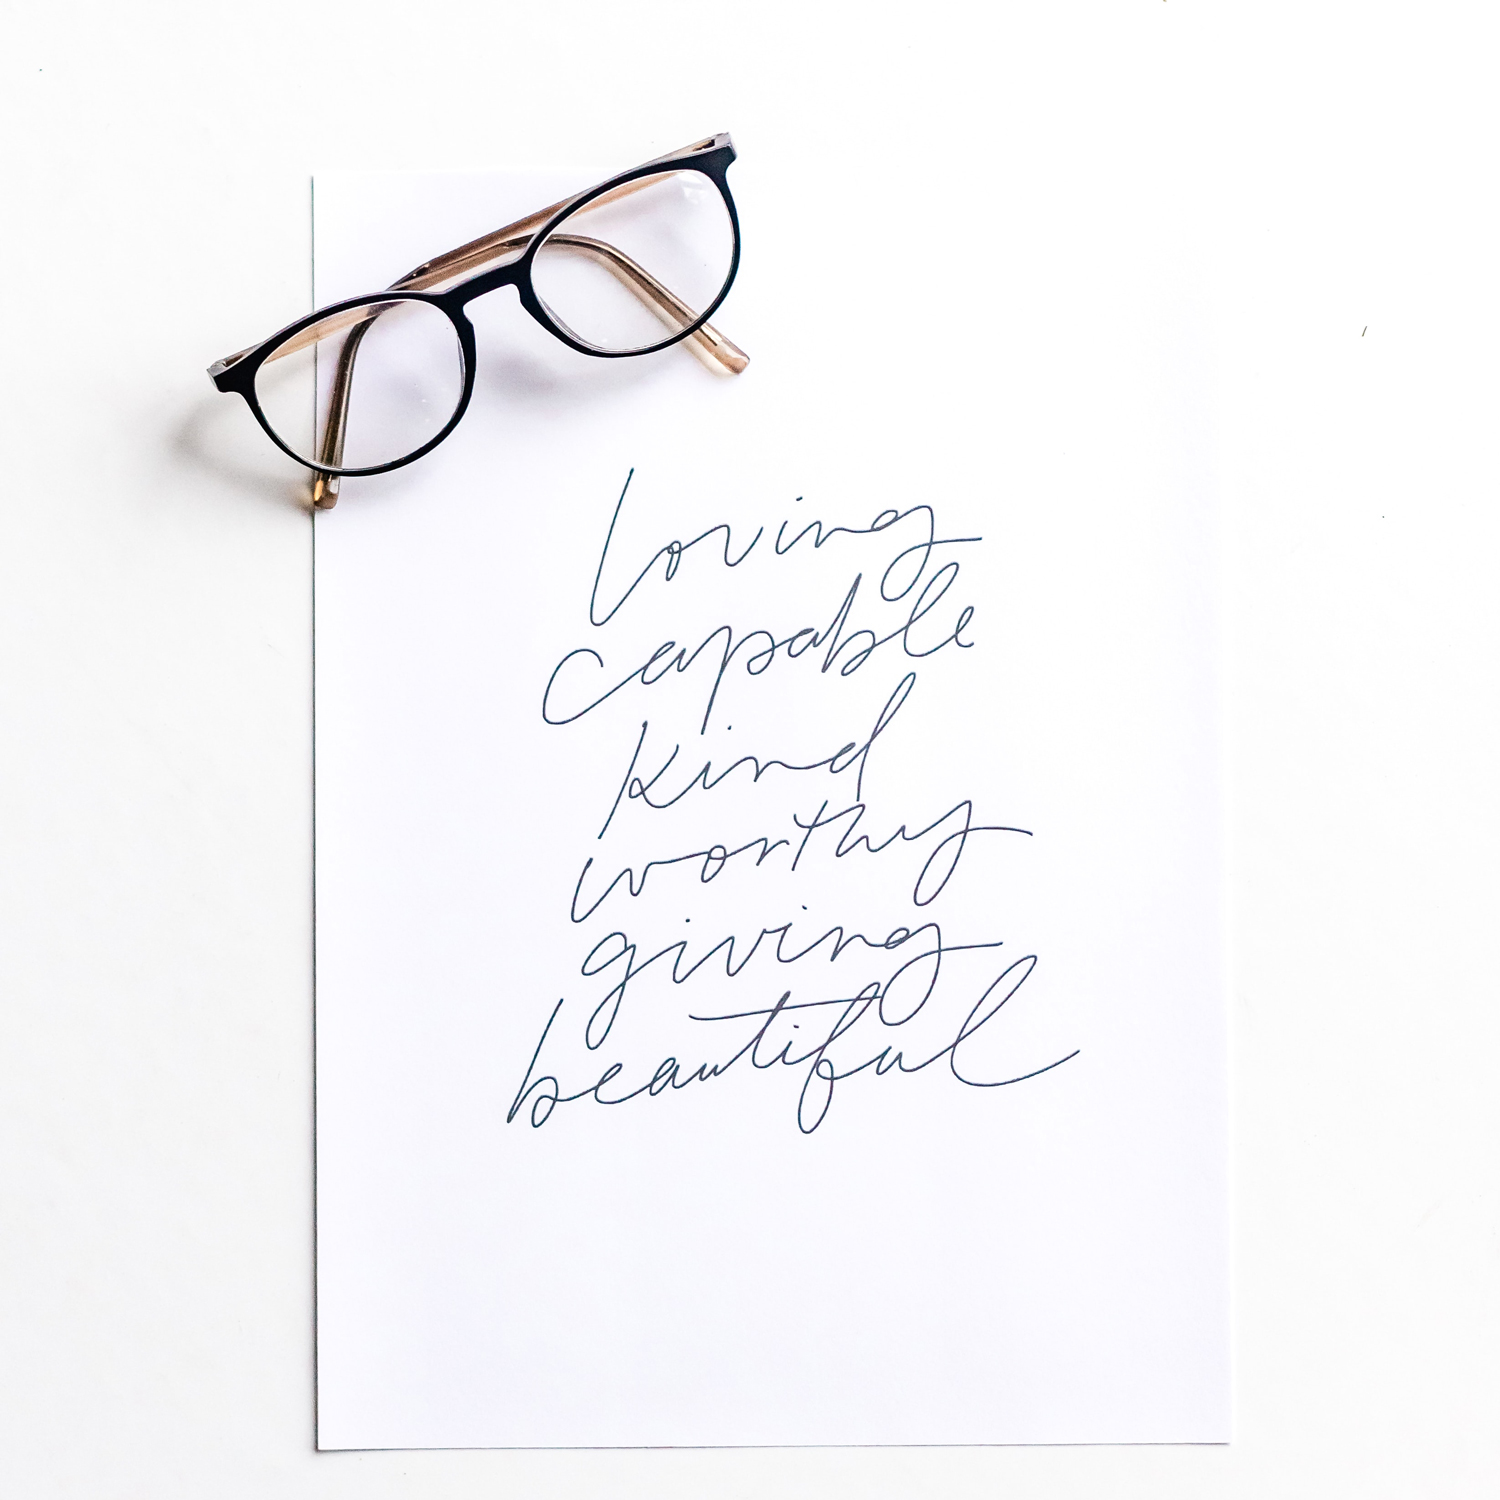 loving capable kind worthy giving beautiful handwriting on paper